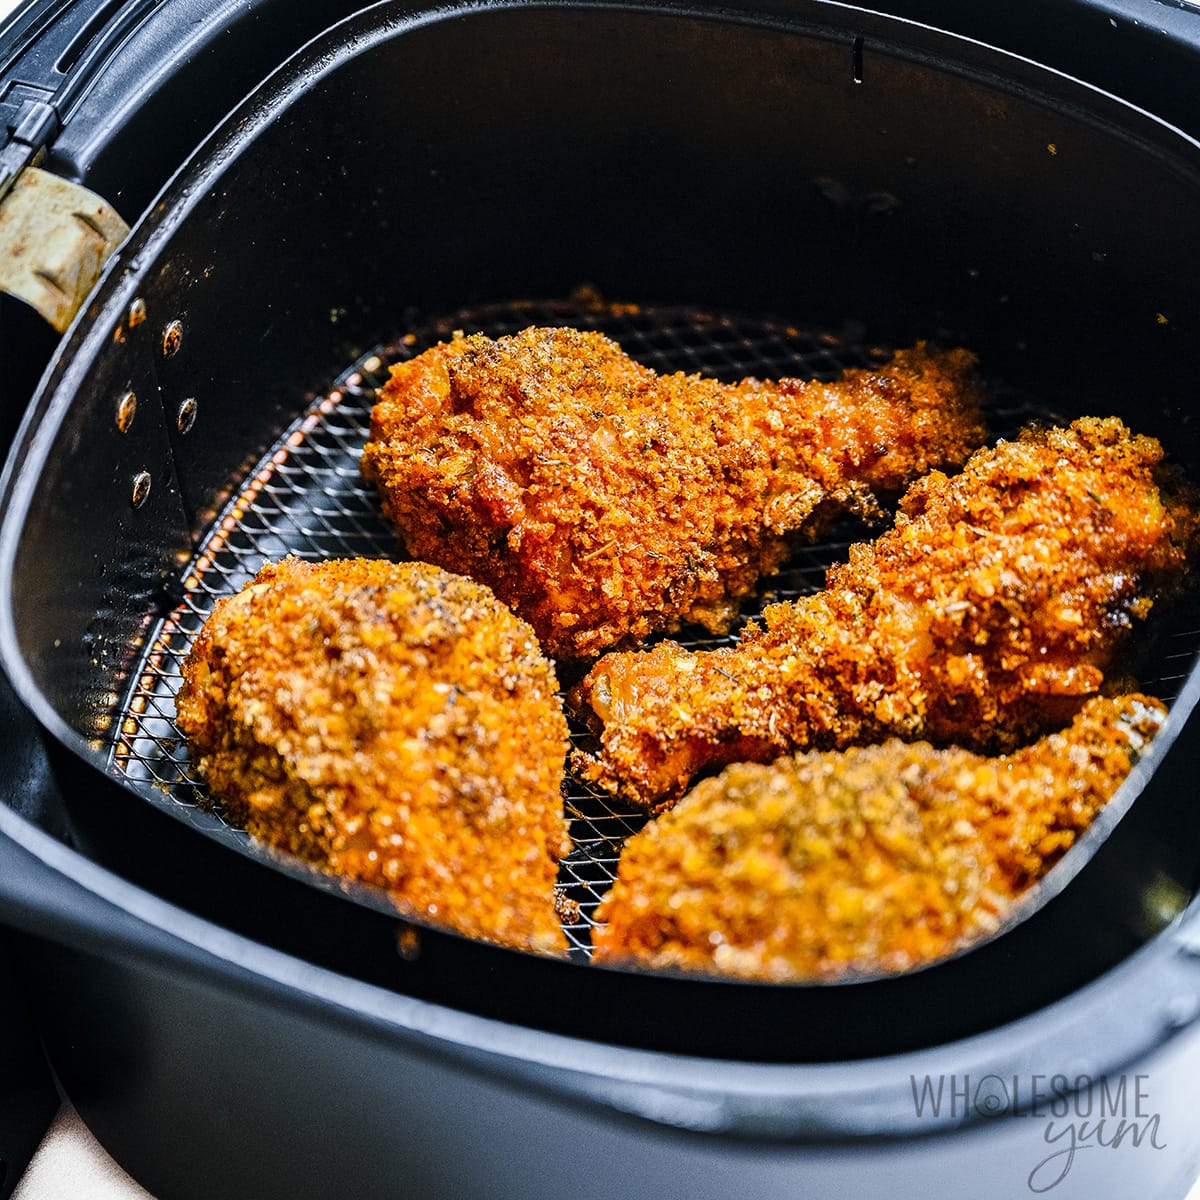 Finished keto fried chicken.